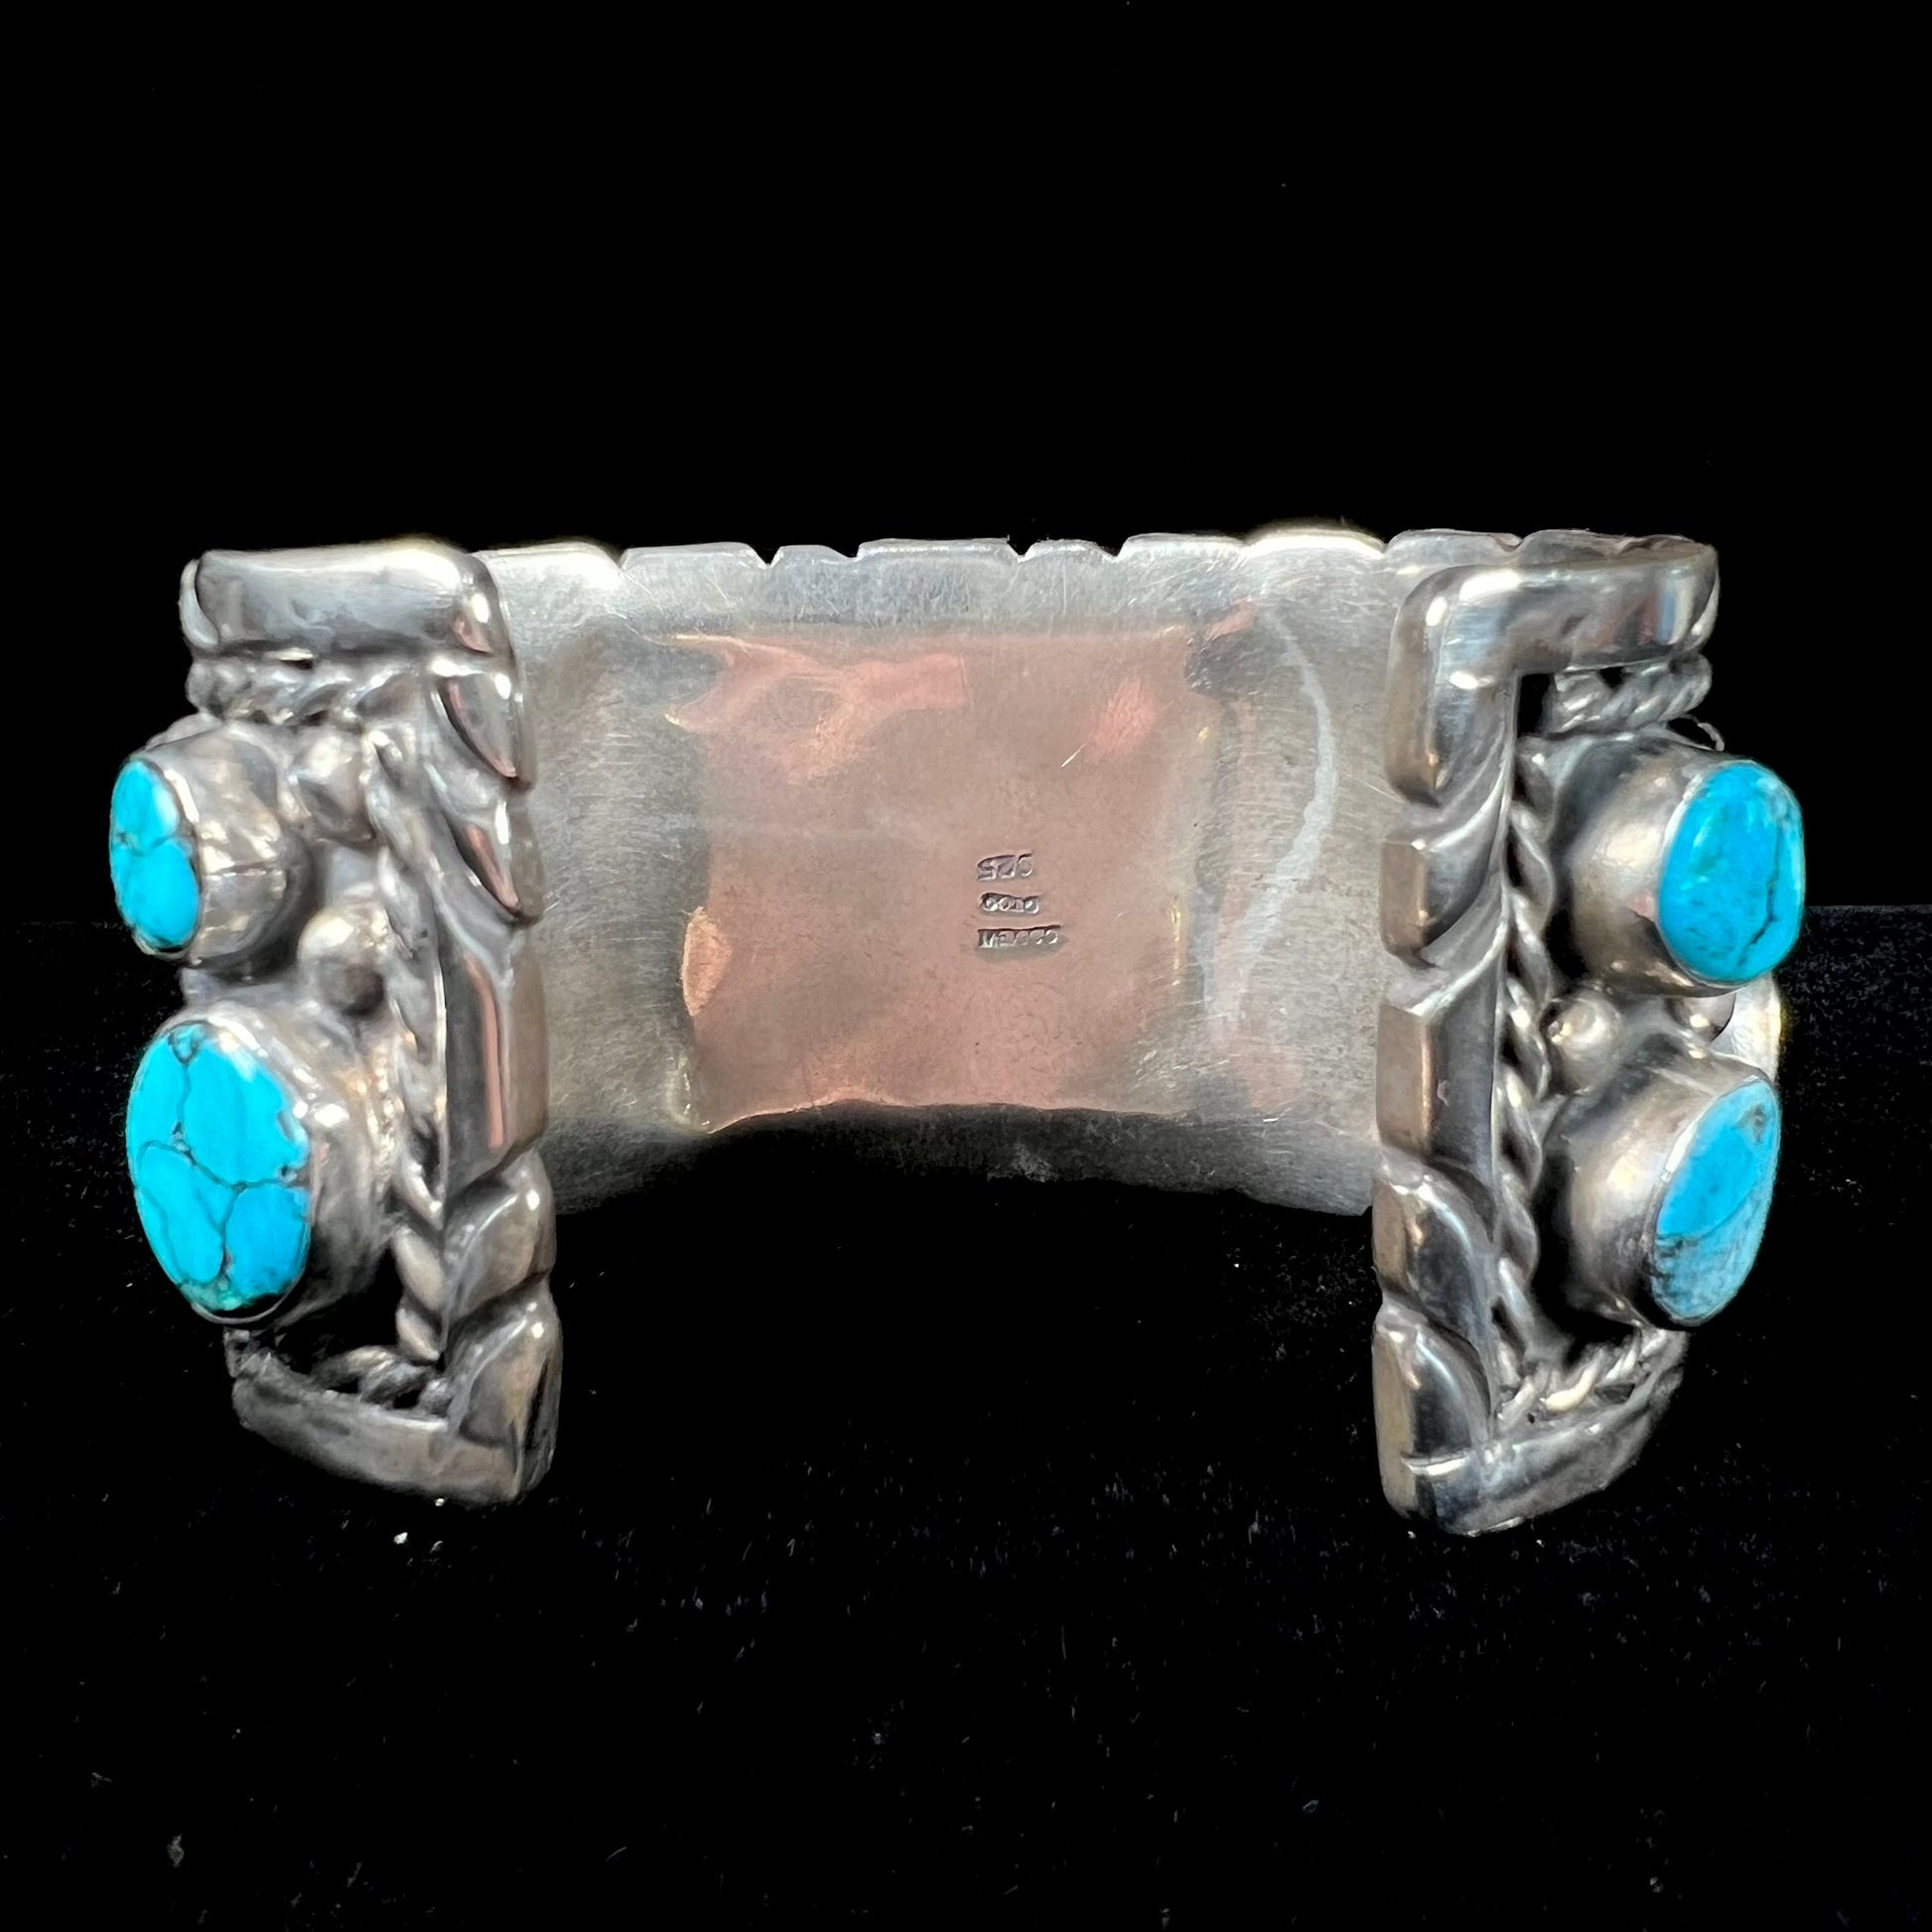 A men's sterling silver cuff bracelet bezel set with natural and synthetic turquoise stones.